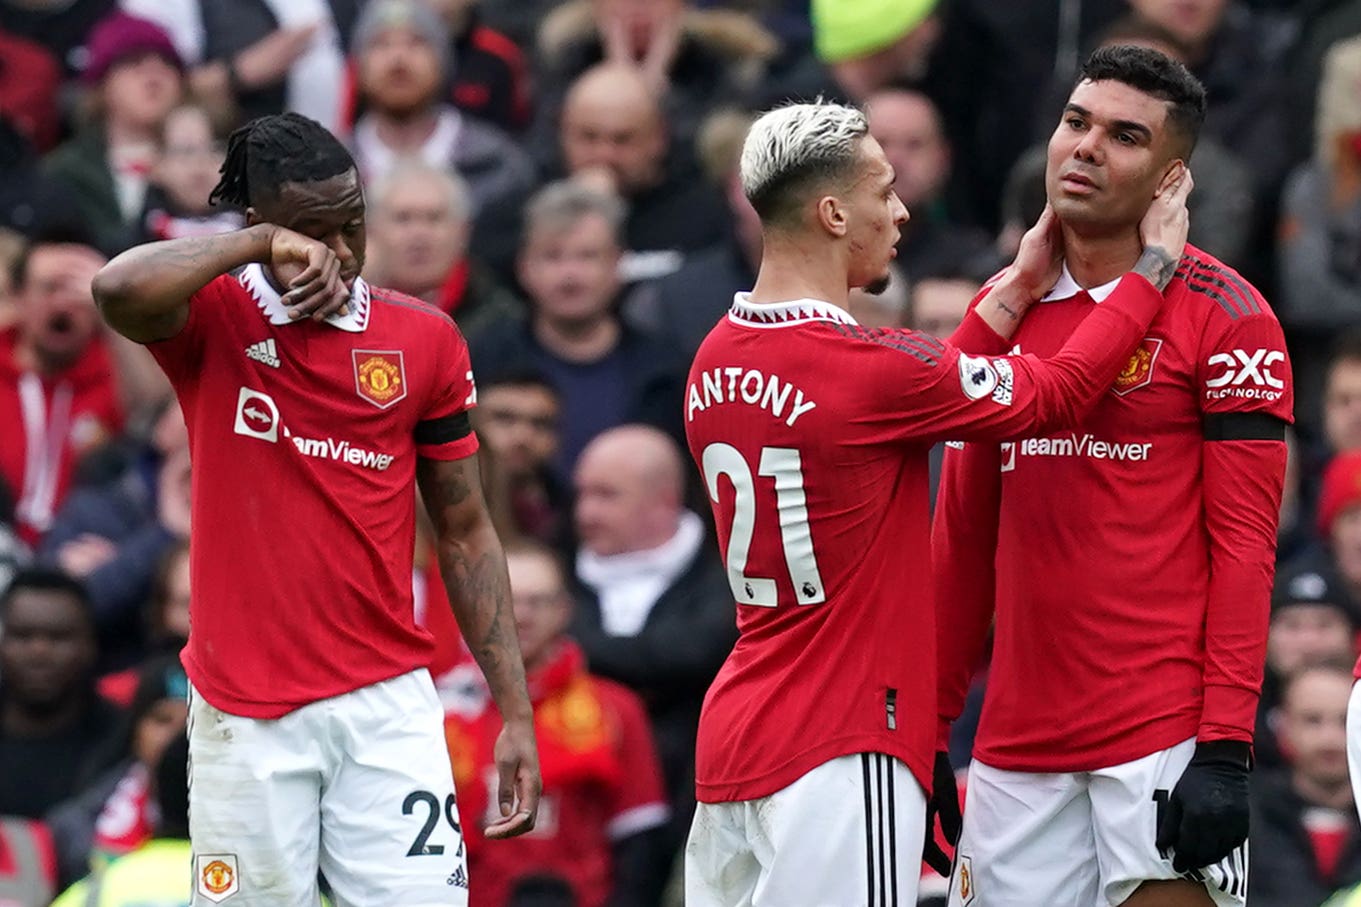 Casemiro’s red card against Southampton will cause issues for Man Utd